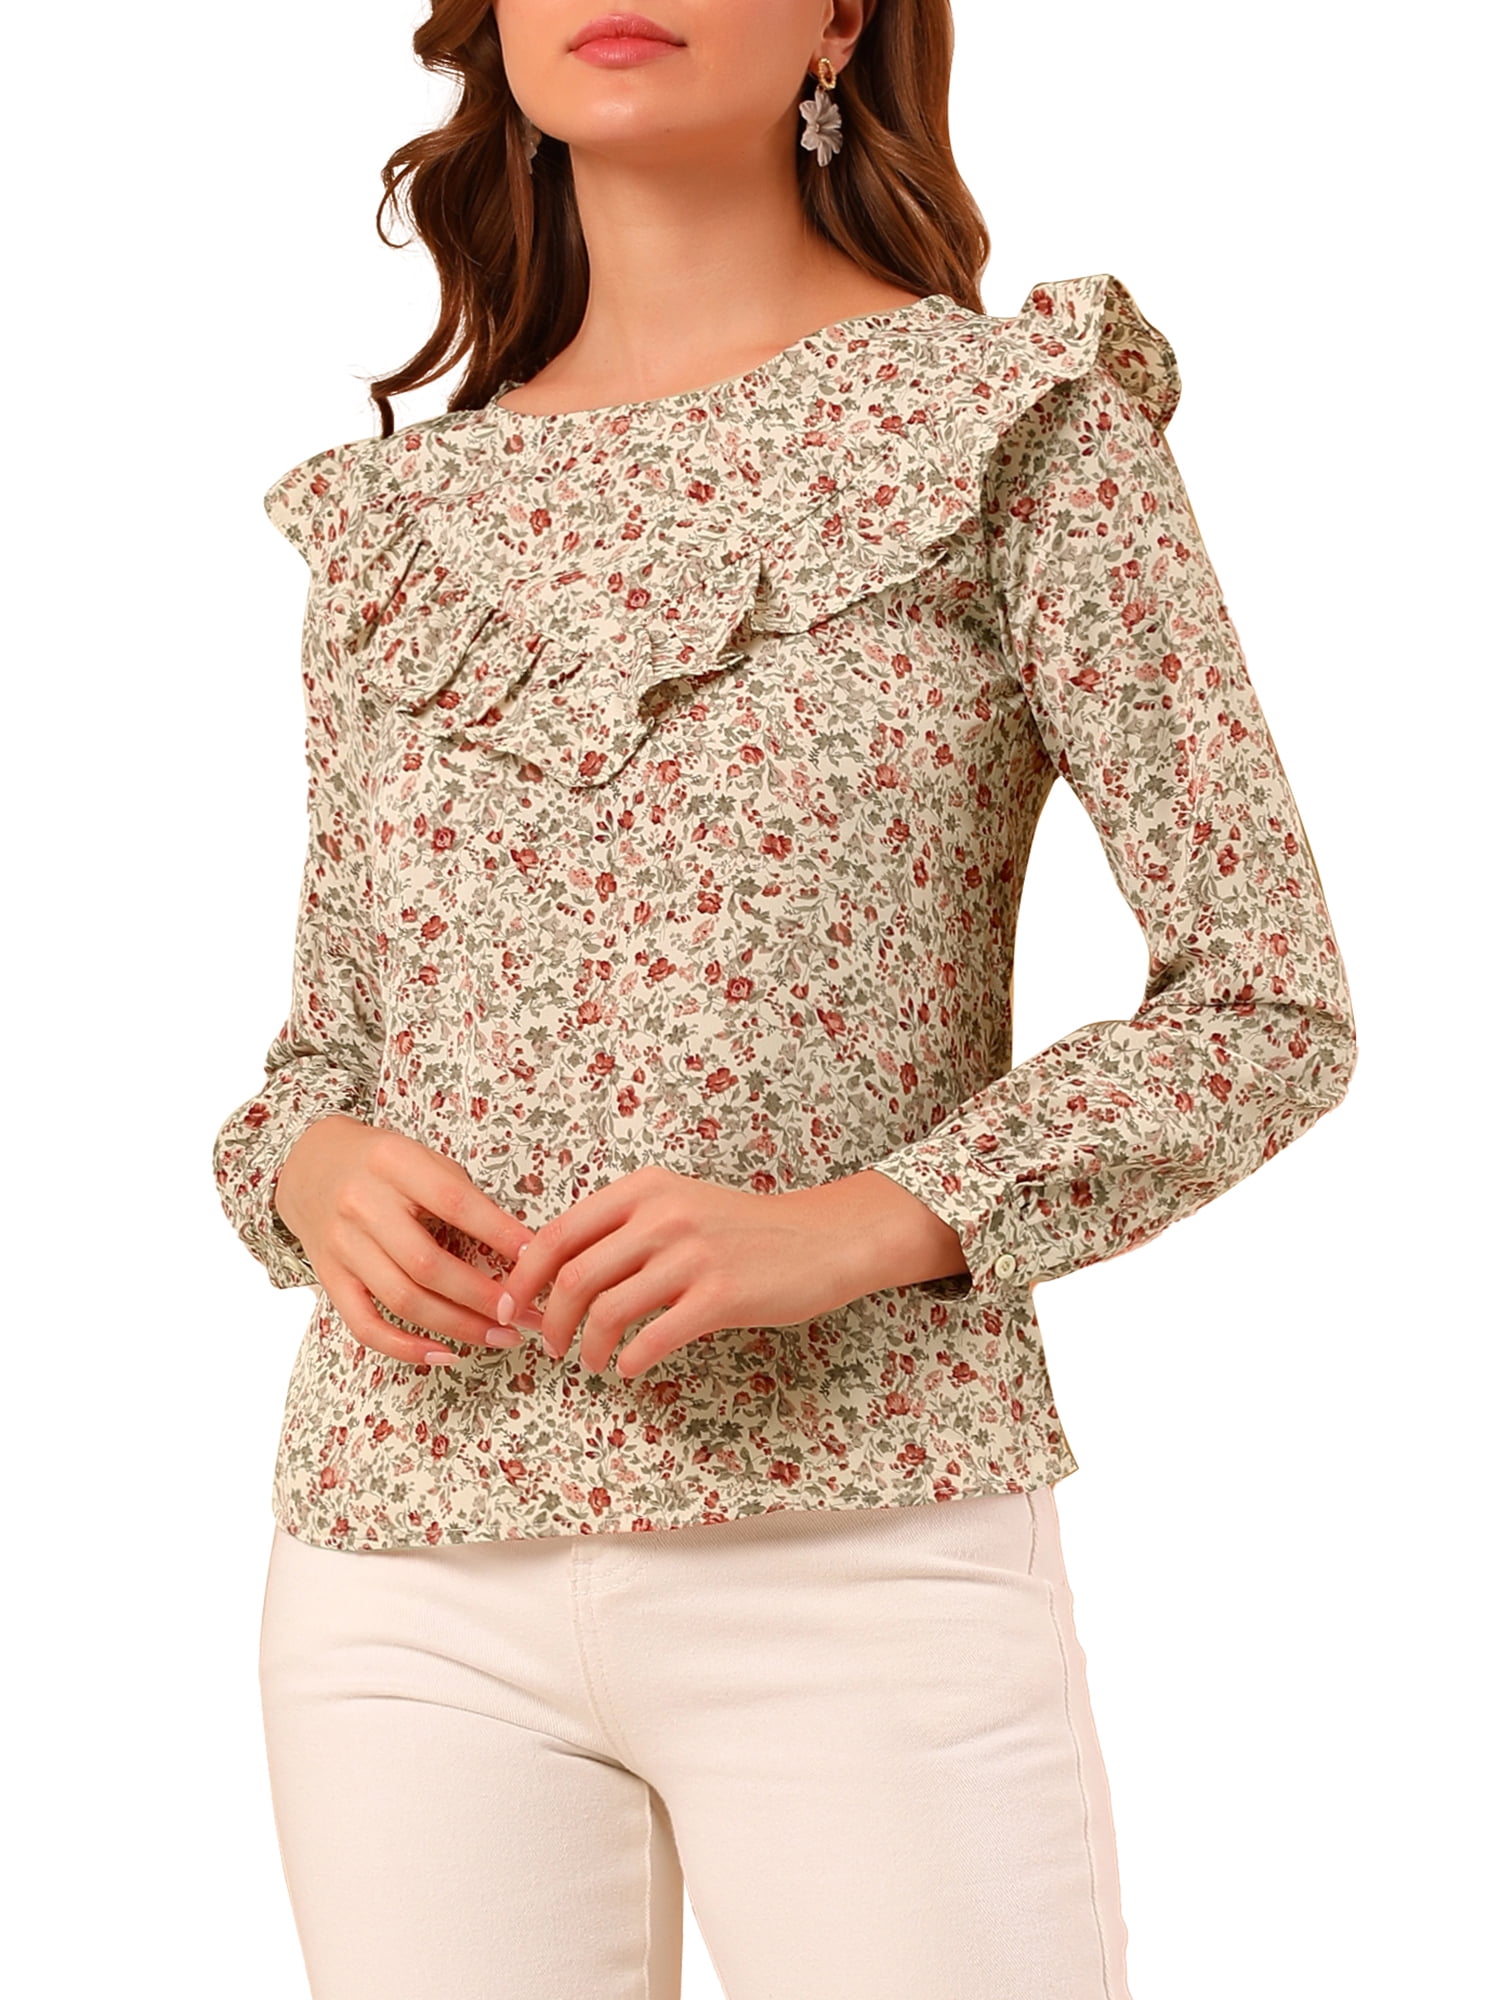 Women Round Neck Floral Printed Tops Ruffle Long Sleeve Casual Blouses and Shirts